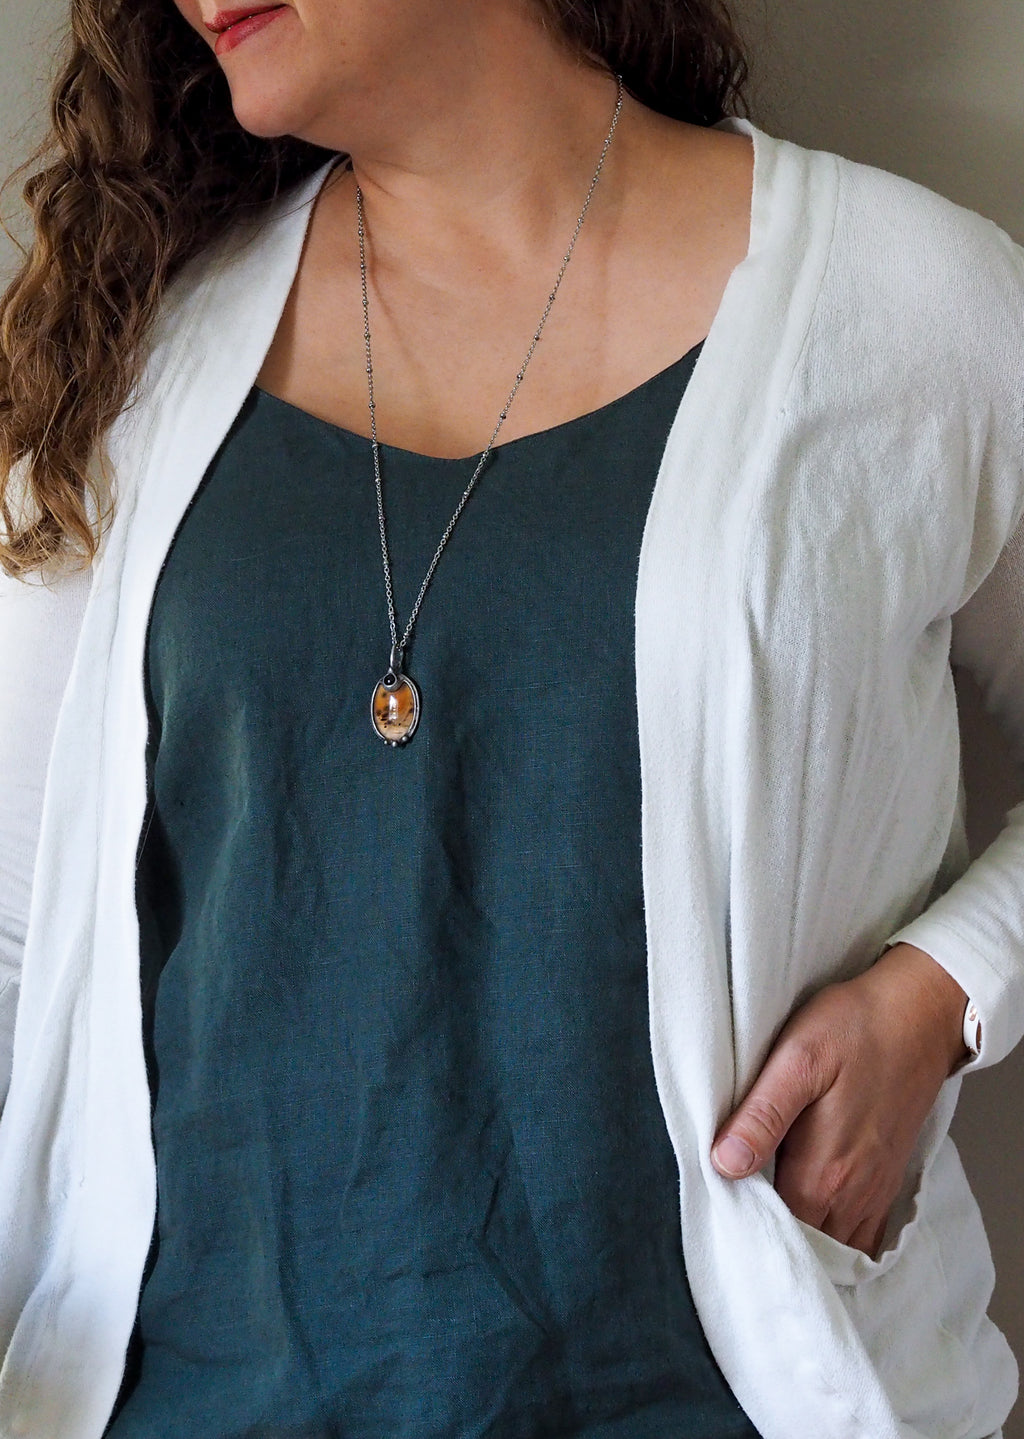 orange crystal talisman necklace on woman in blue top